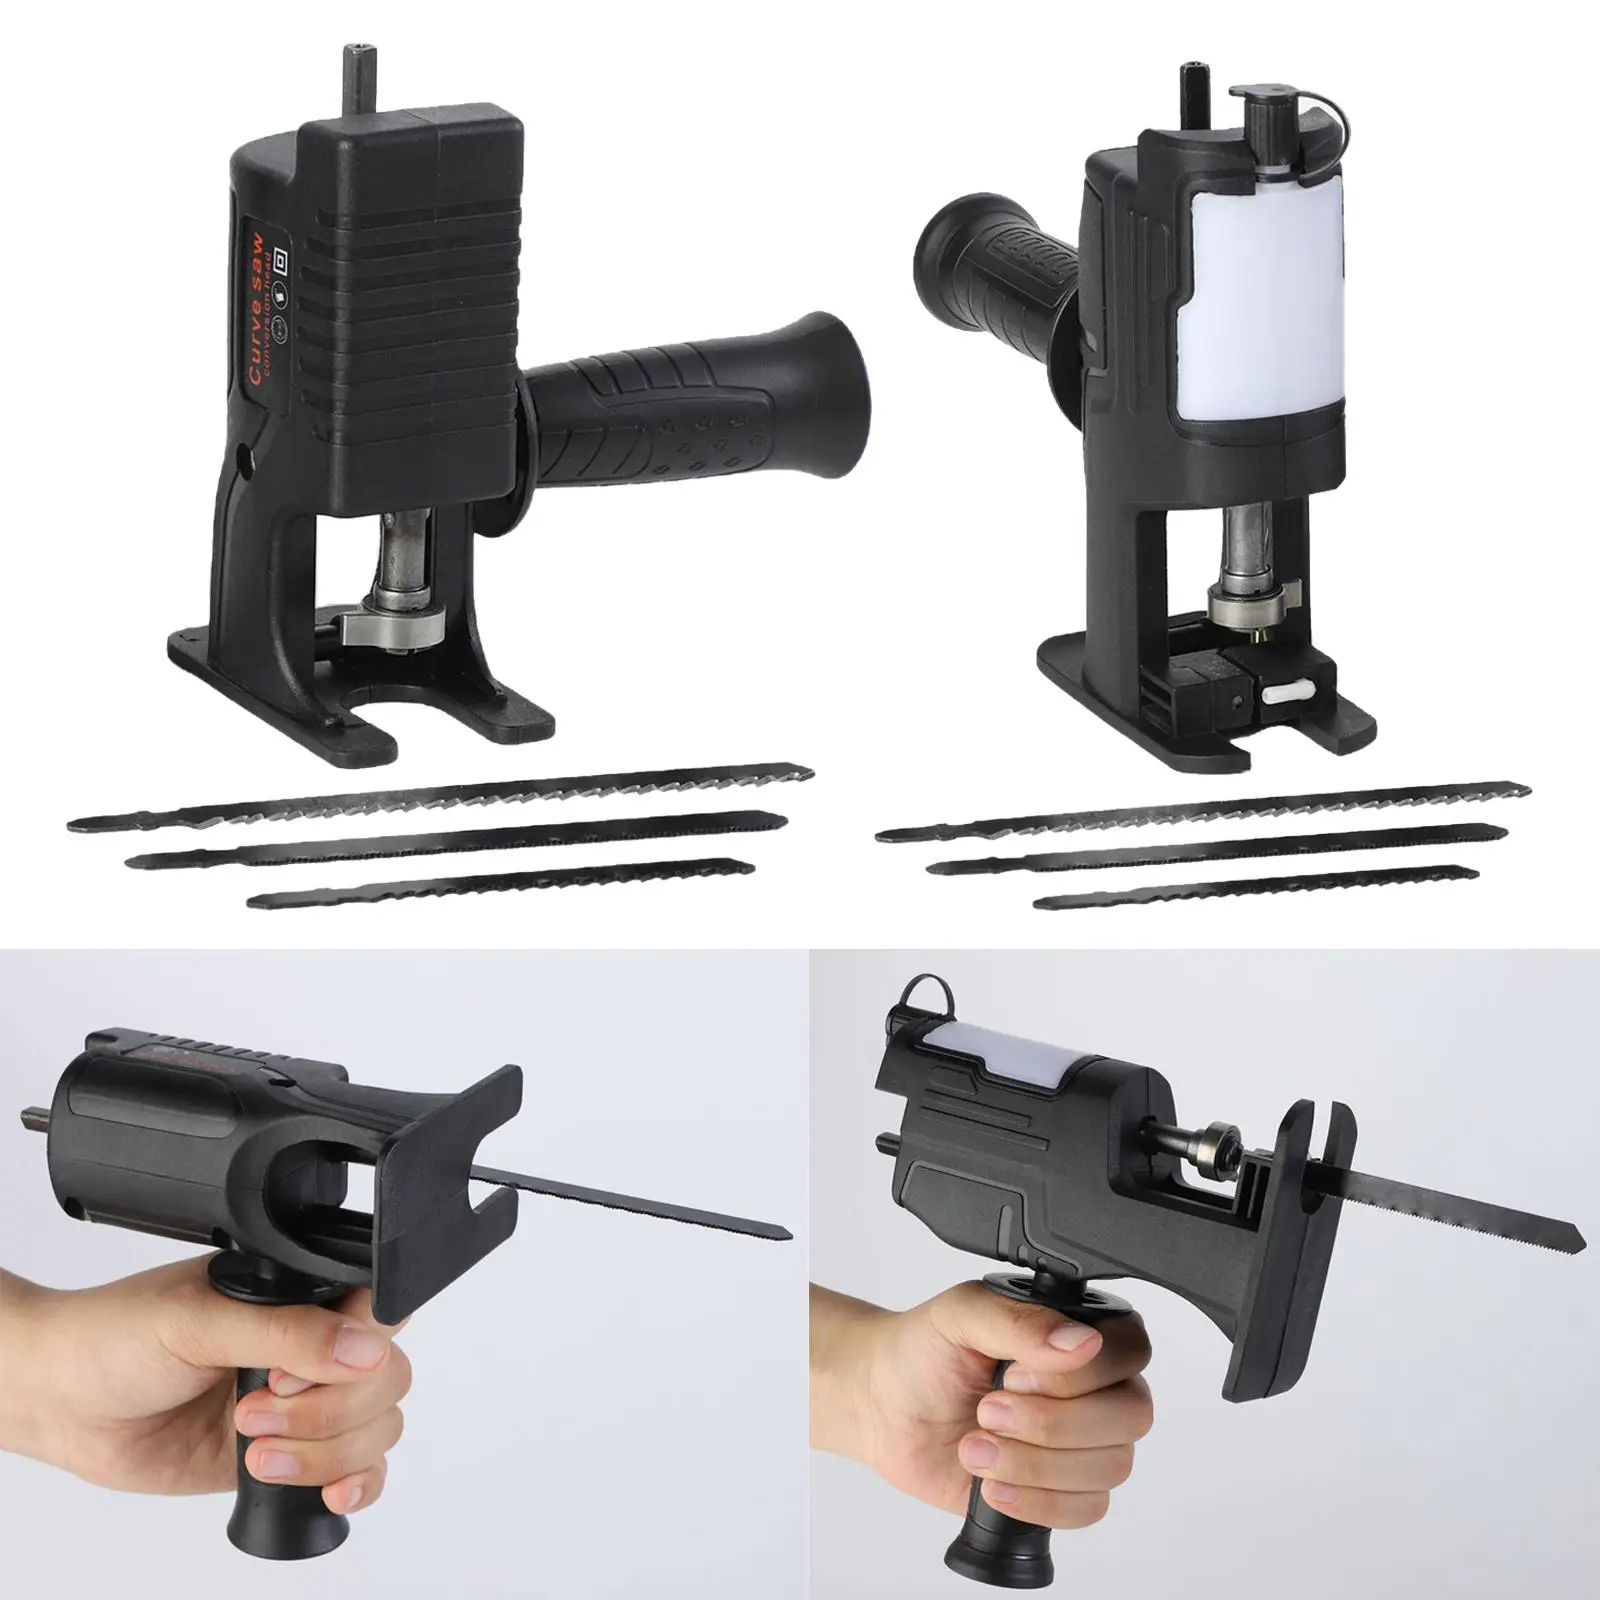 Saw Attachment Handheld Self Assembly Atachment Accessory Electric Cutting Machine for Woodworking Demolition Household Home